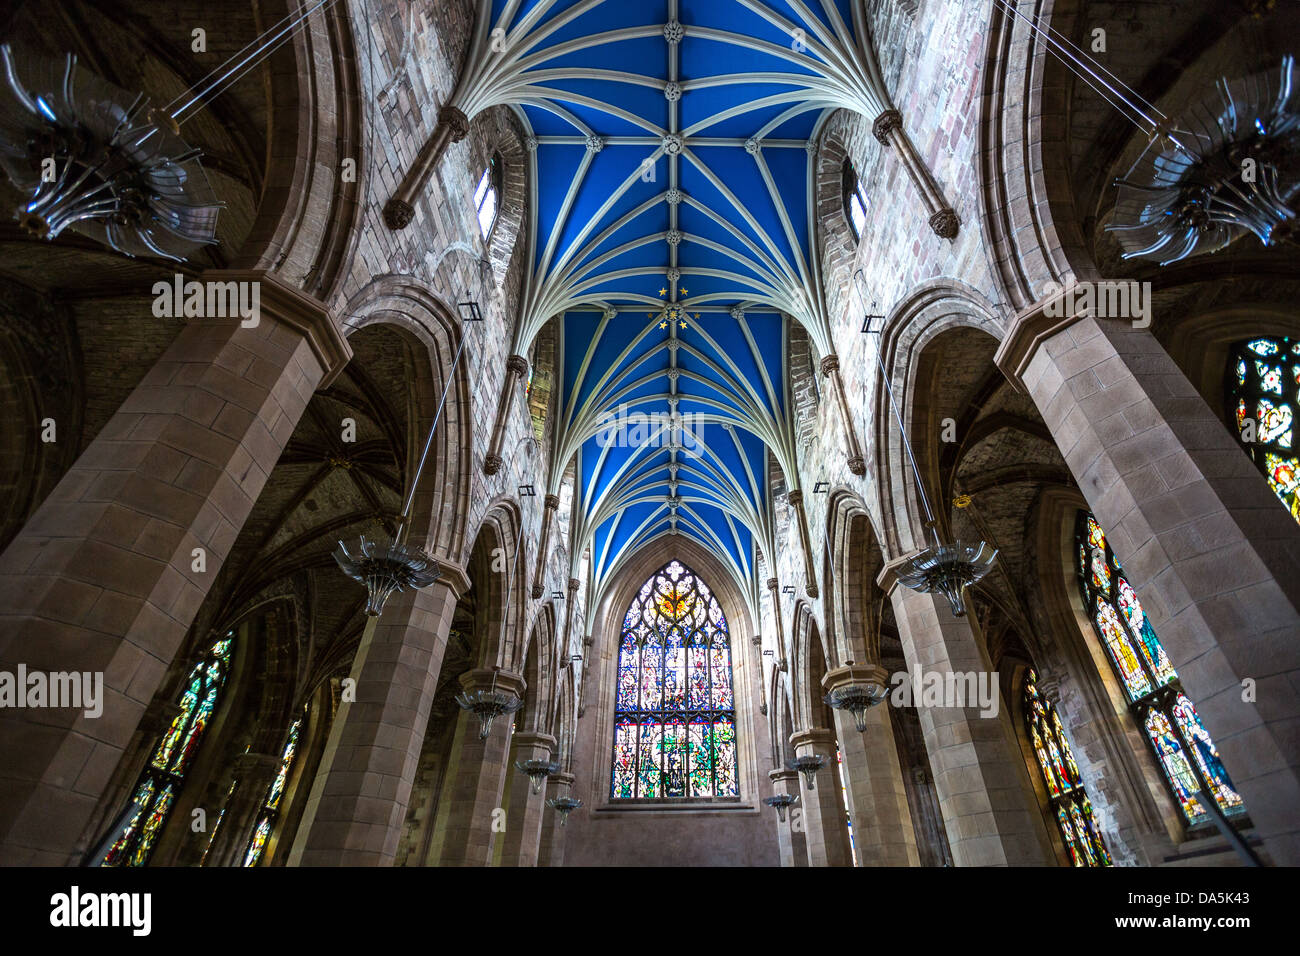 Europe Great Britain, Scotland, Edinburgh, the gothic interior of the St. Giles cathedral. Stock Photo